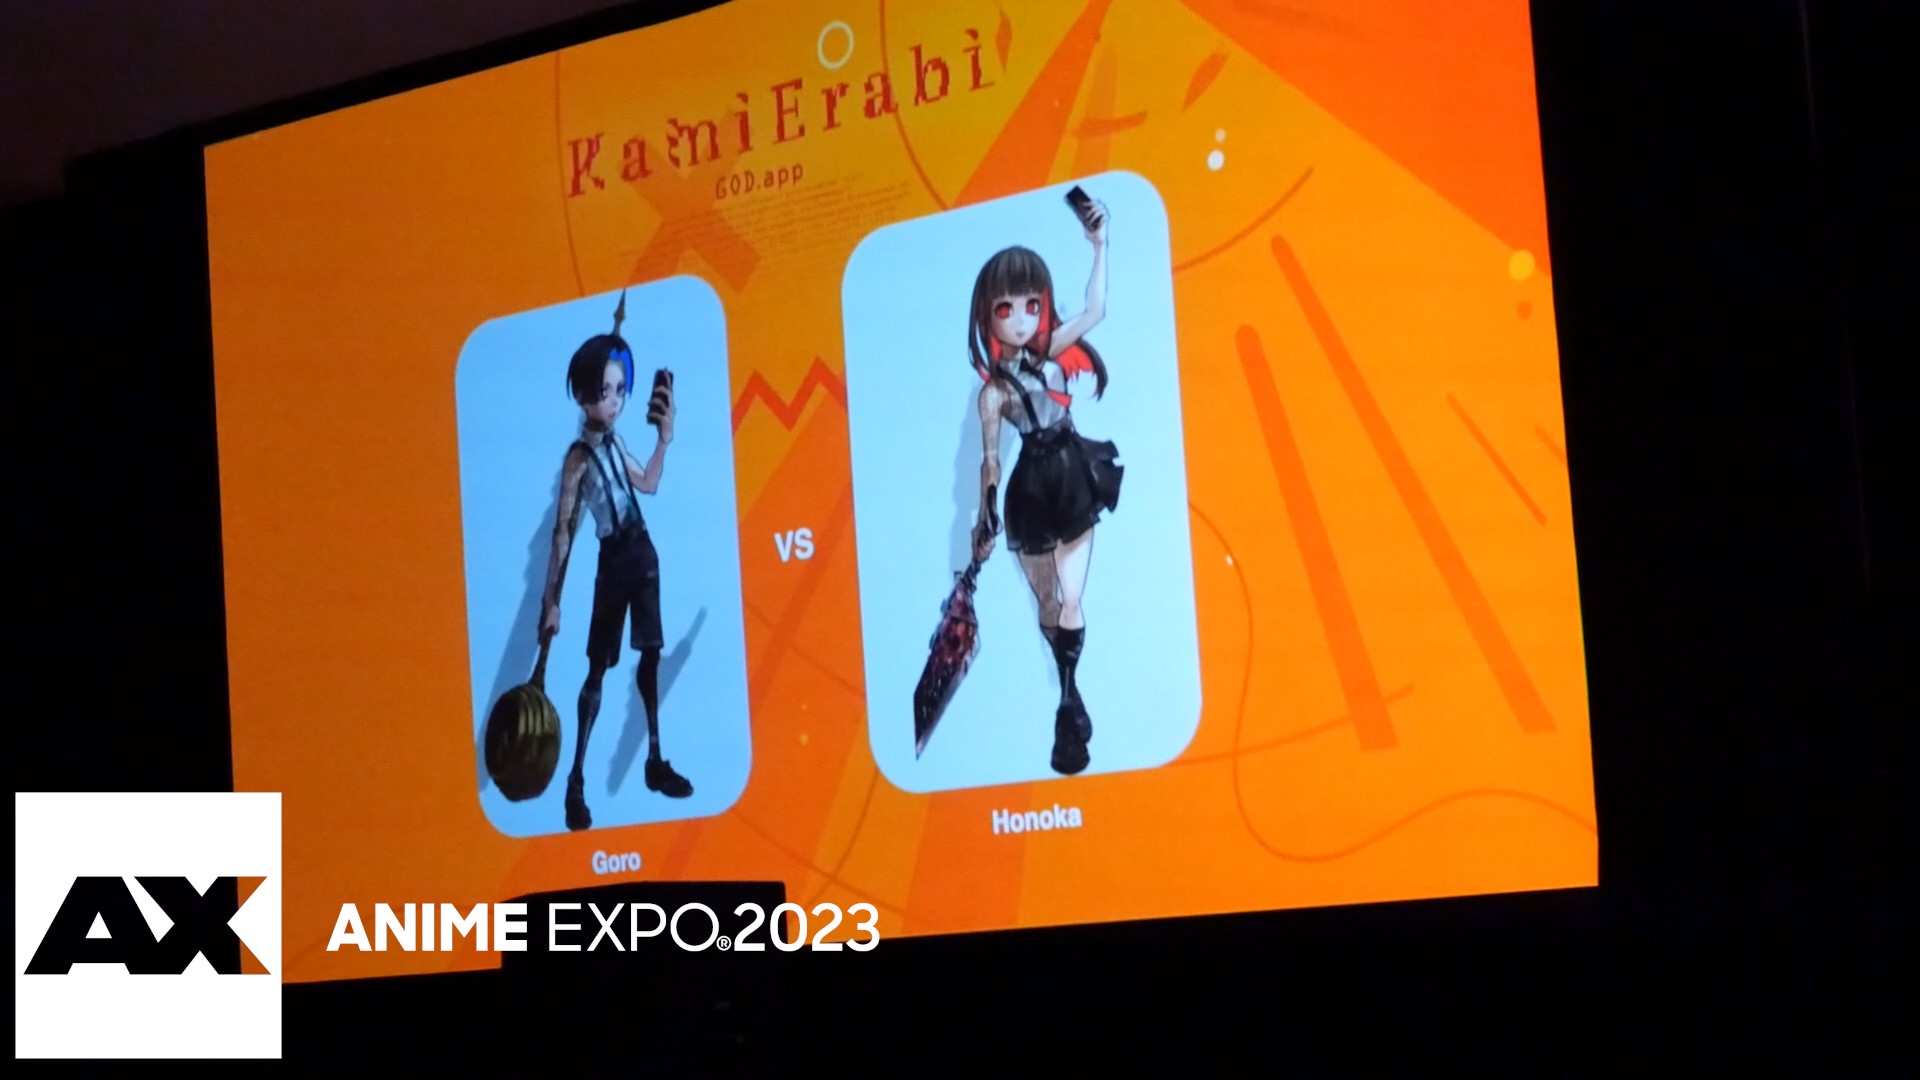 The Creators of KamiErabi GOD.app Bring the Exciting New Series to AX 2023